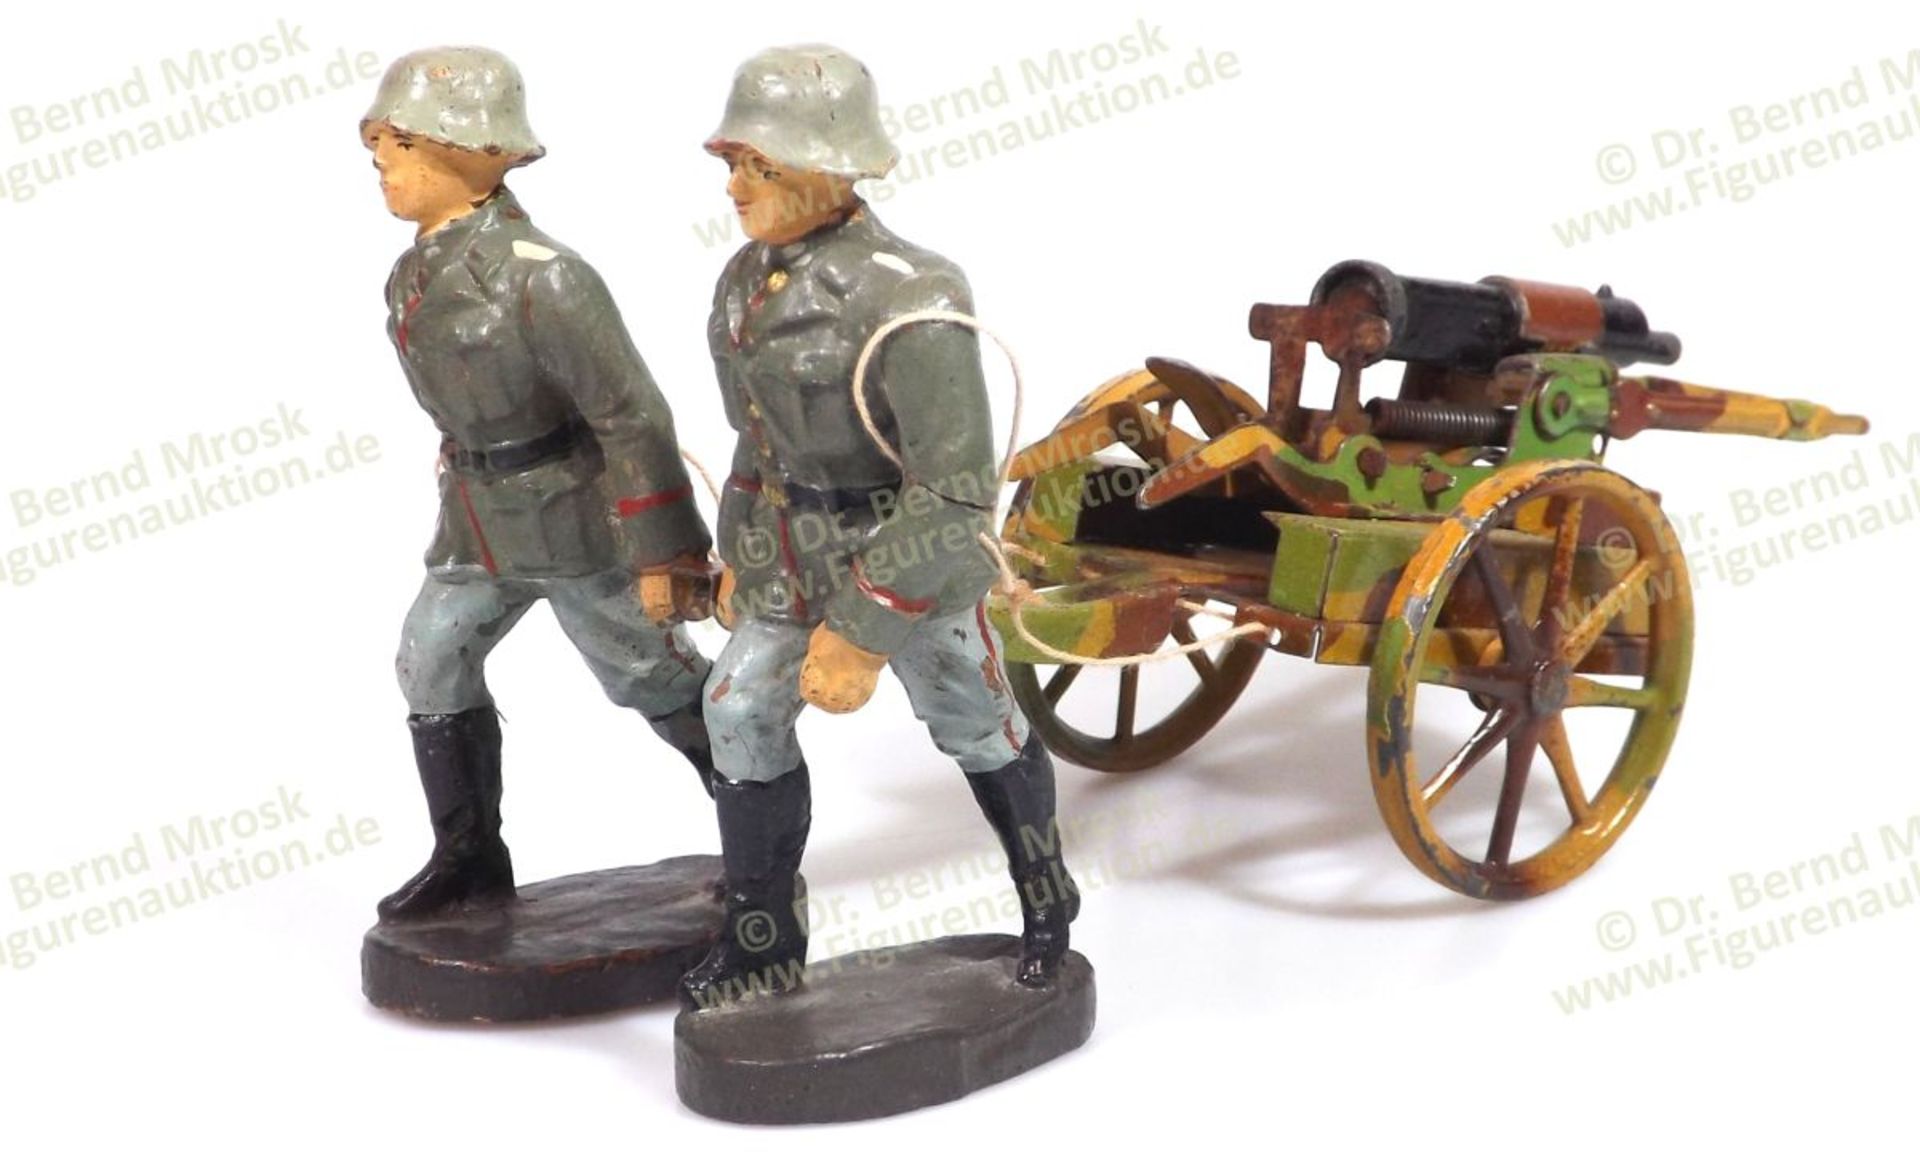 German military, Elastolin, composition figures, 7-7,5 cm size, made in Germany about 1938